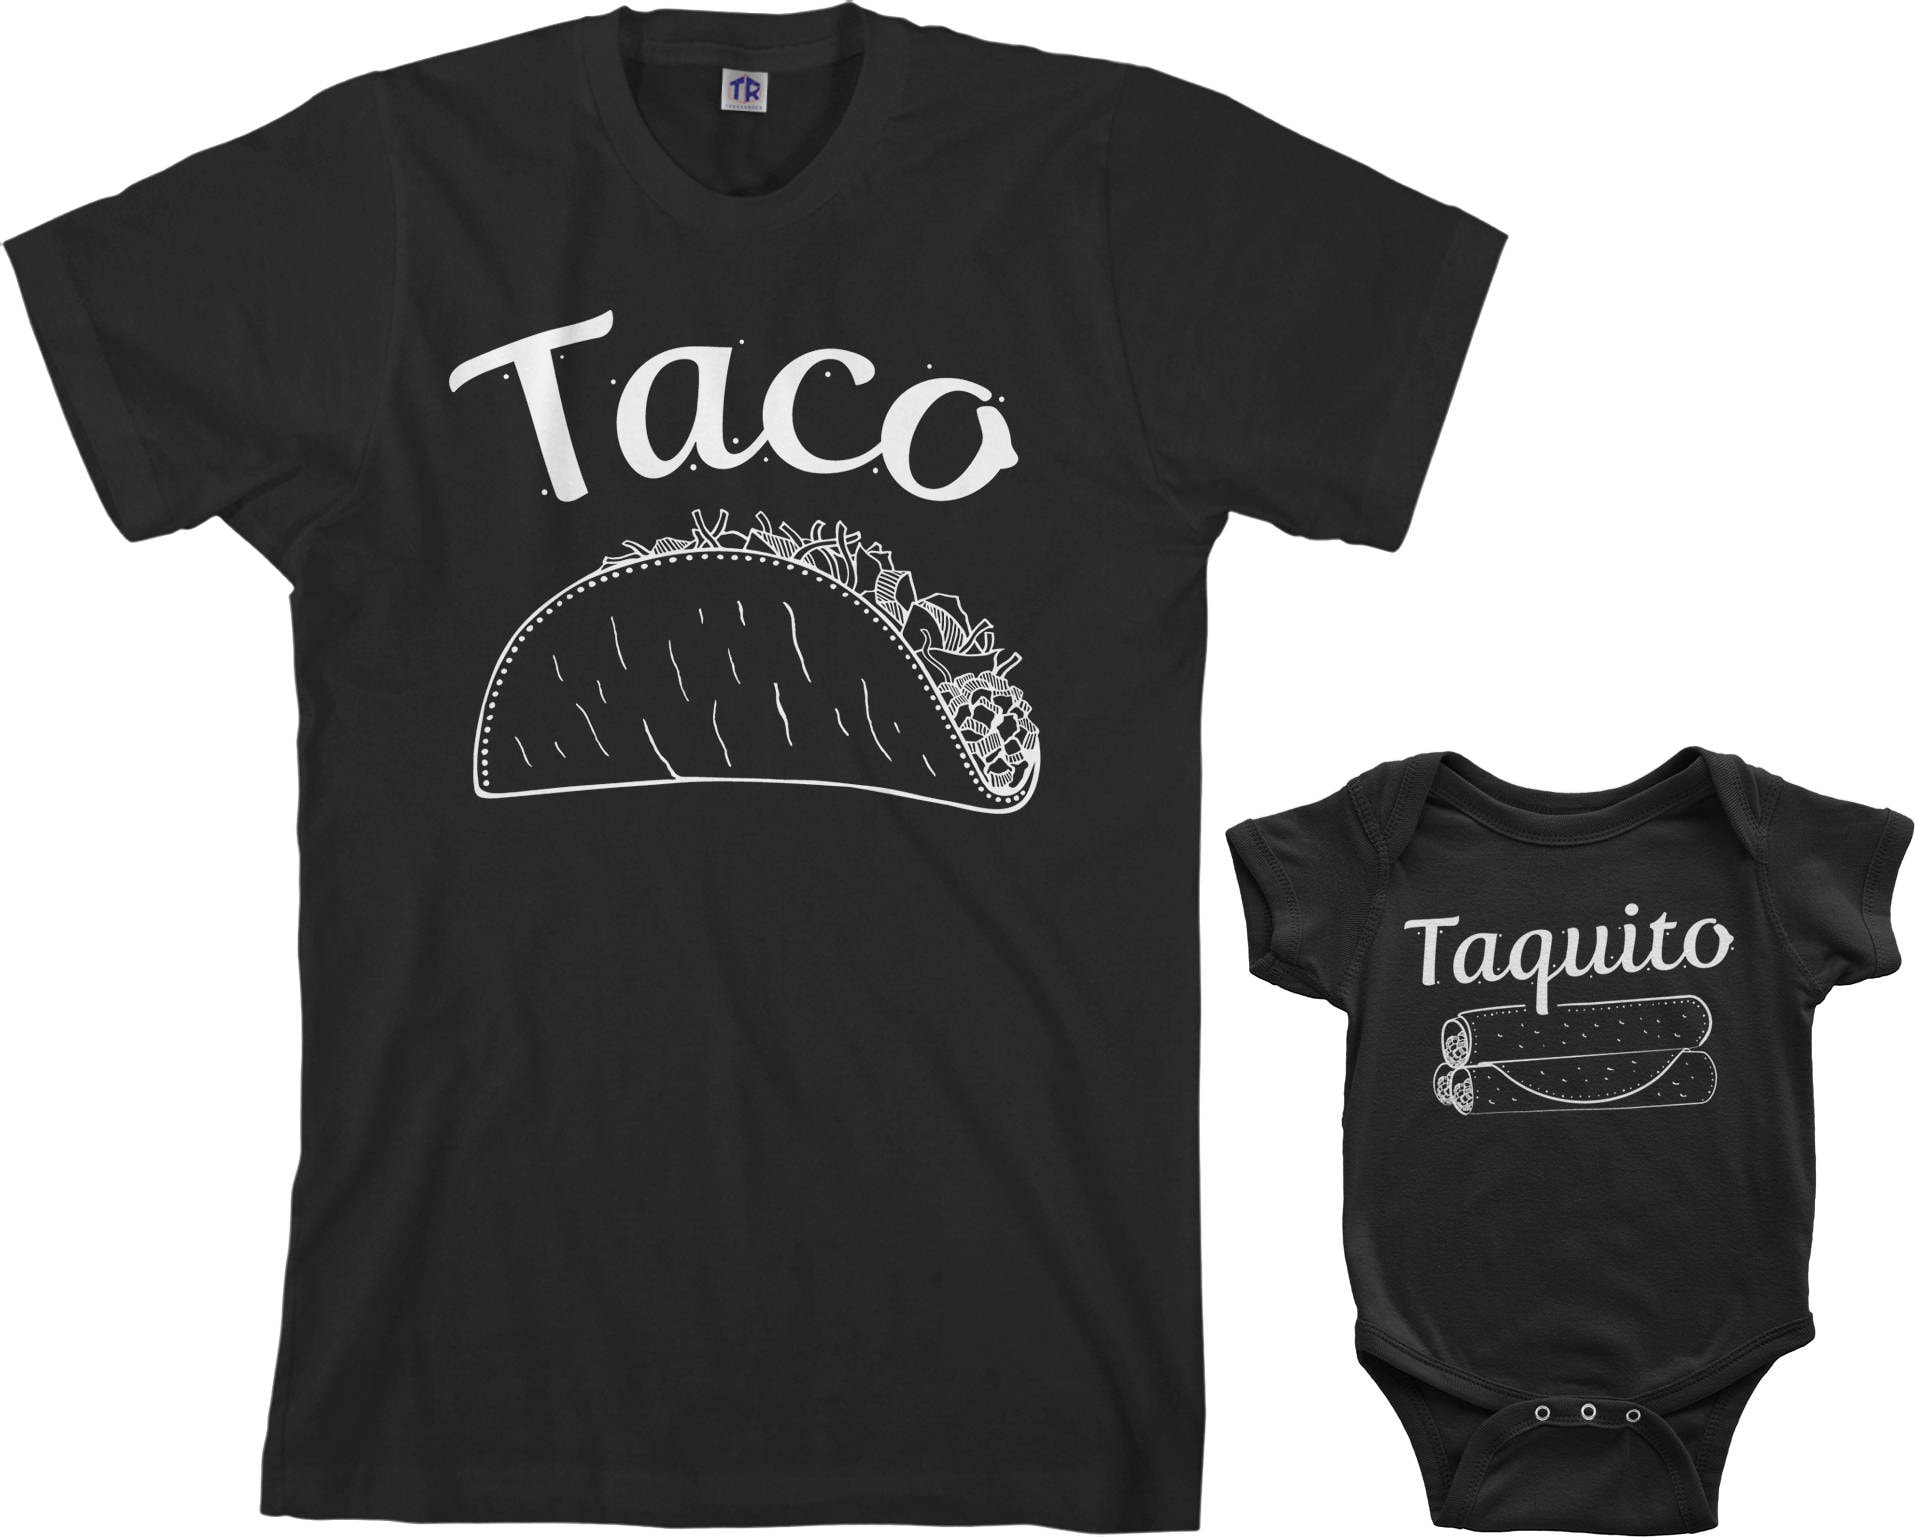 Taco Taquito Men s T shirt and Infant Bodysuit Dad and 